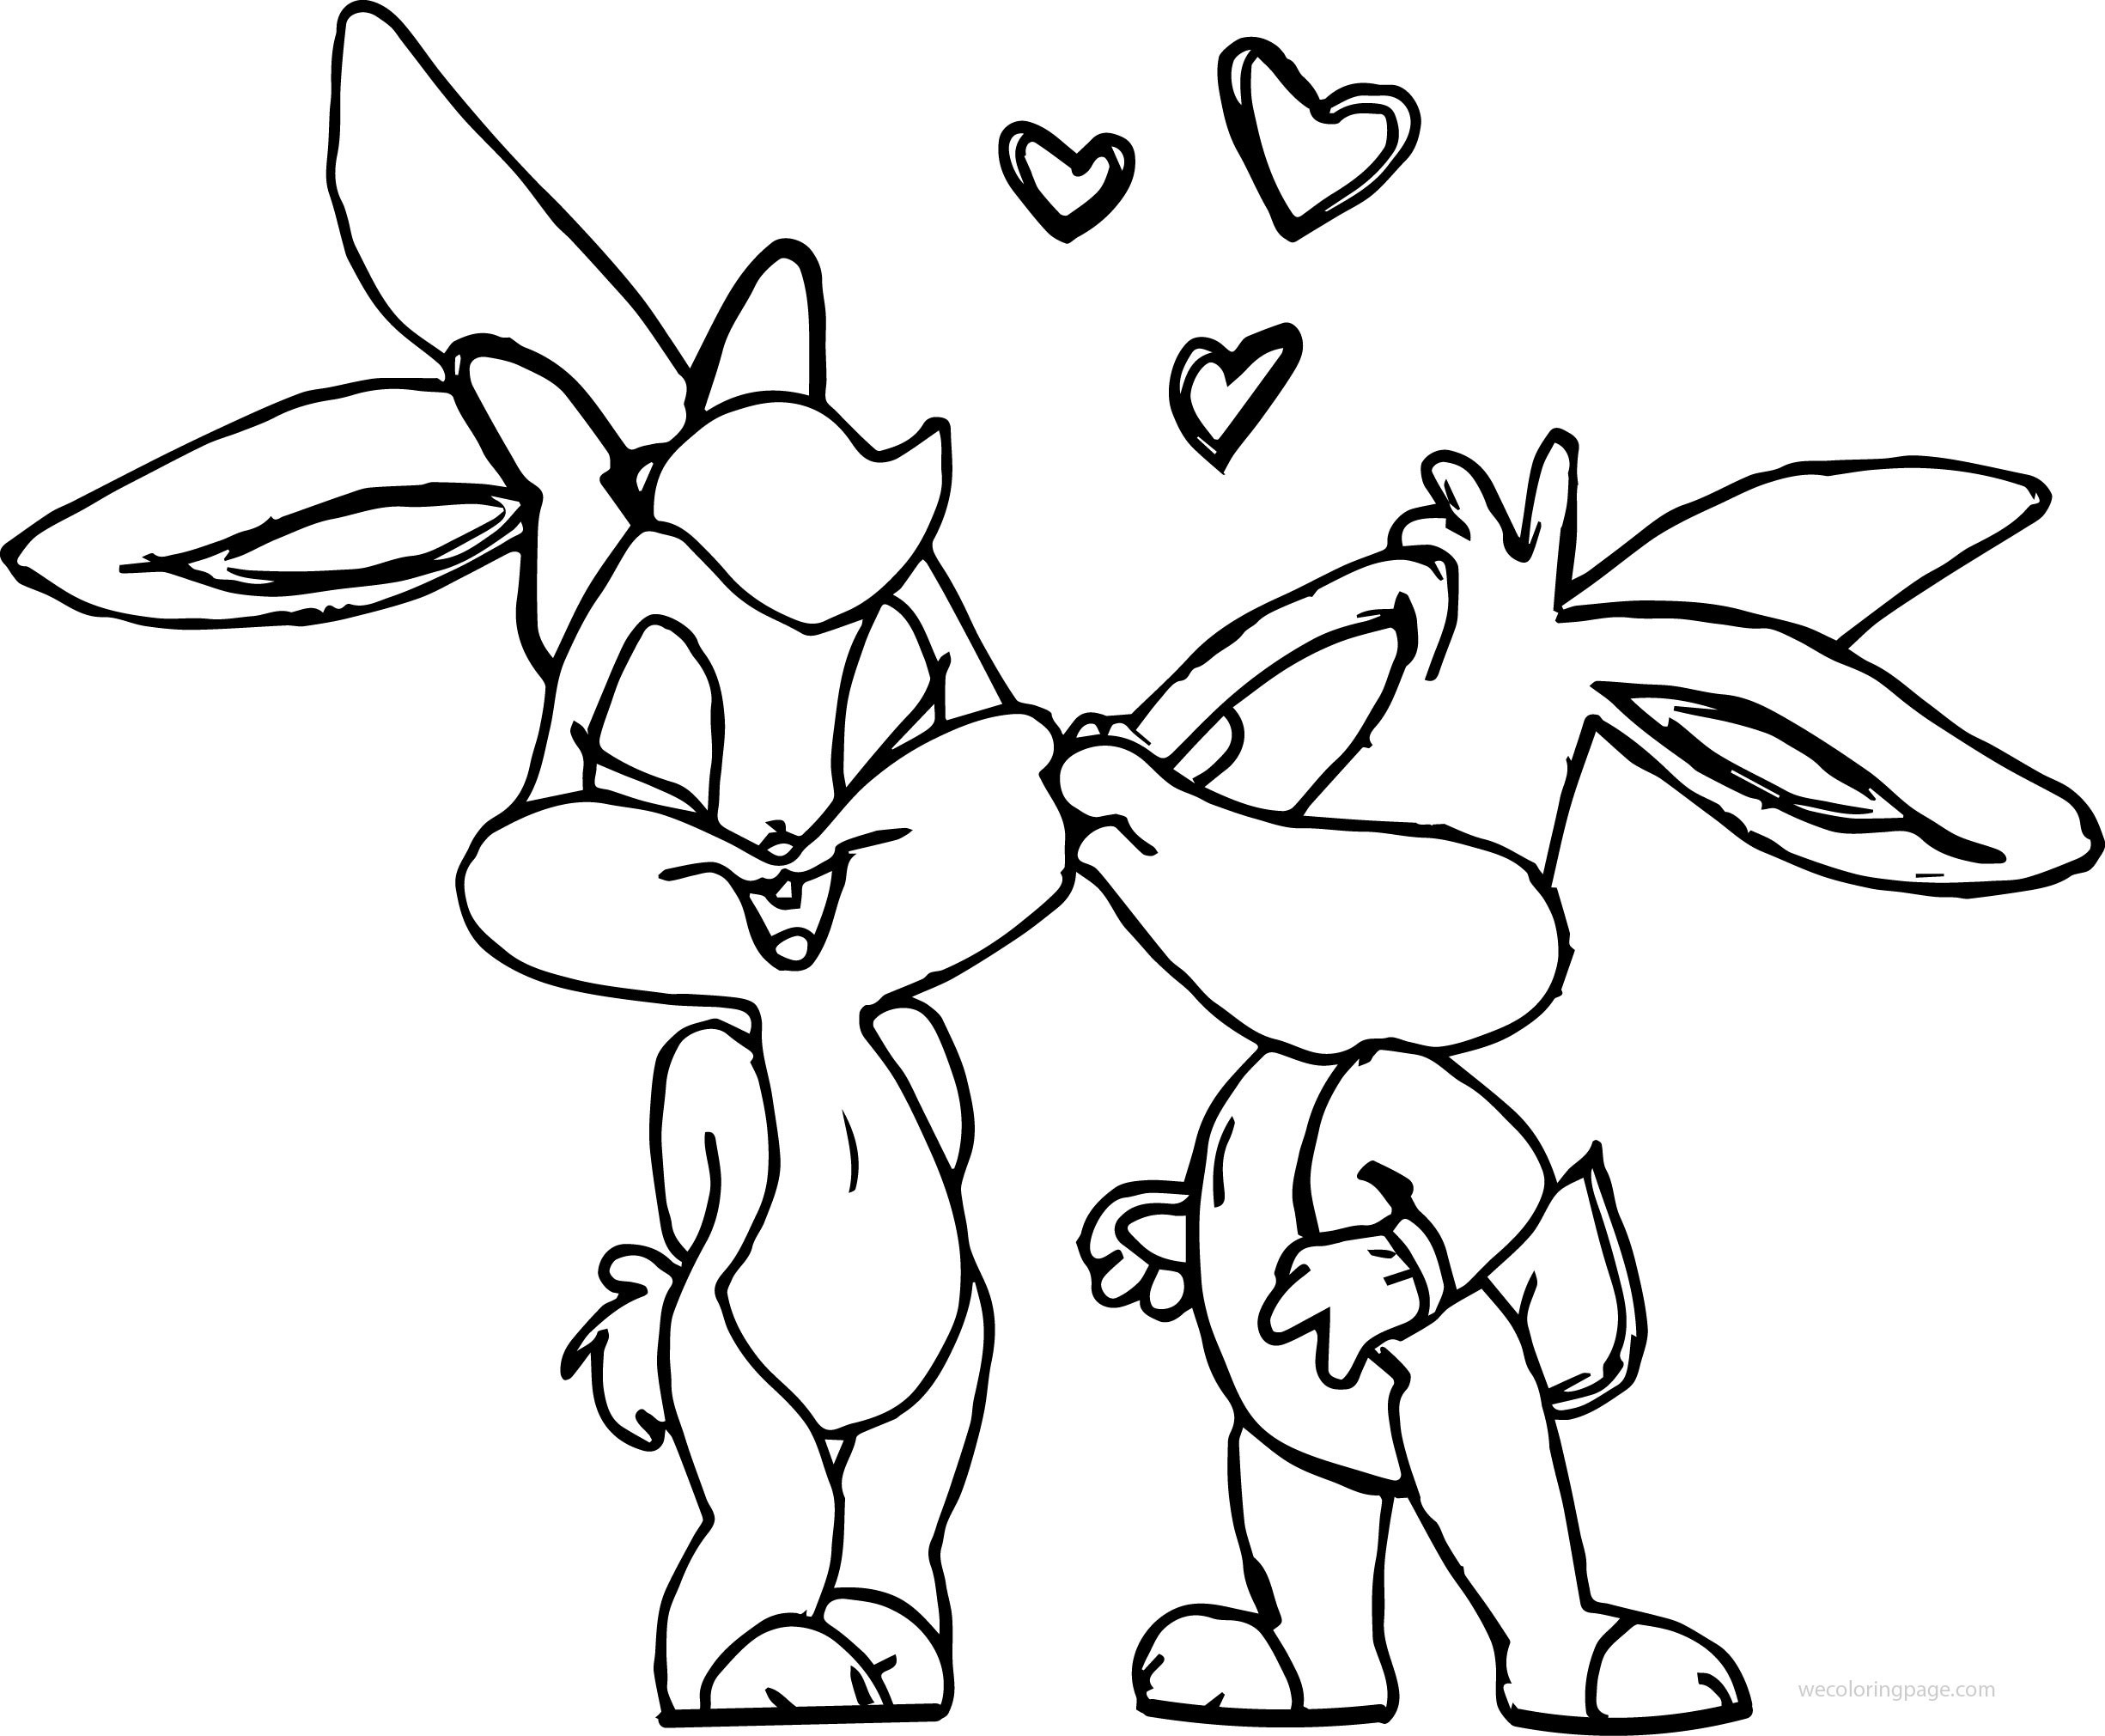 Baby Rabbit Coloring Pages
 Baby Rabbit Coloring Pages at GetColorings